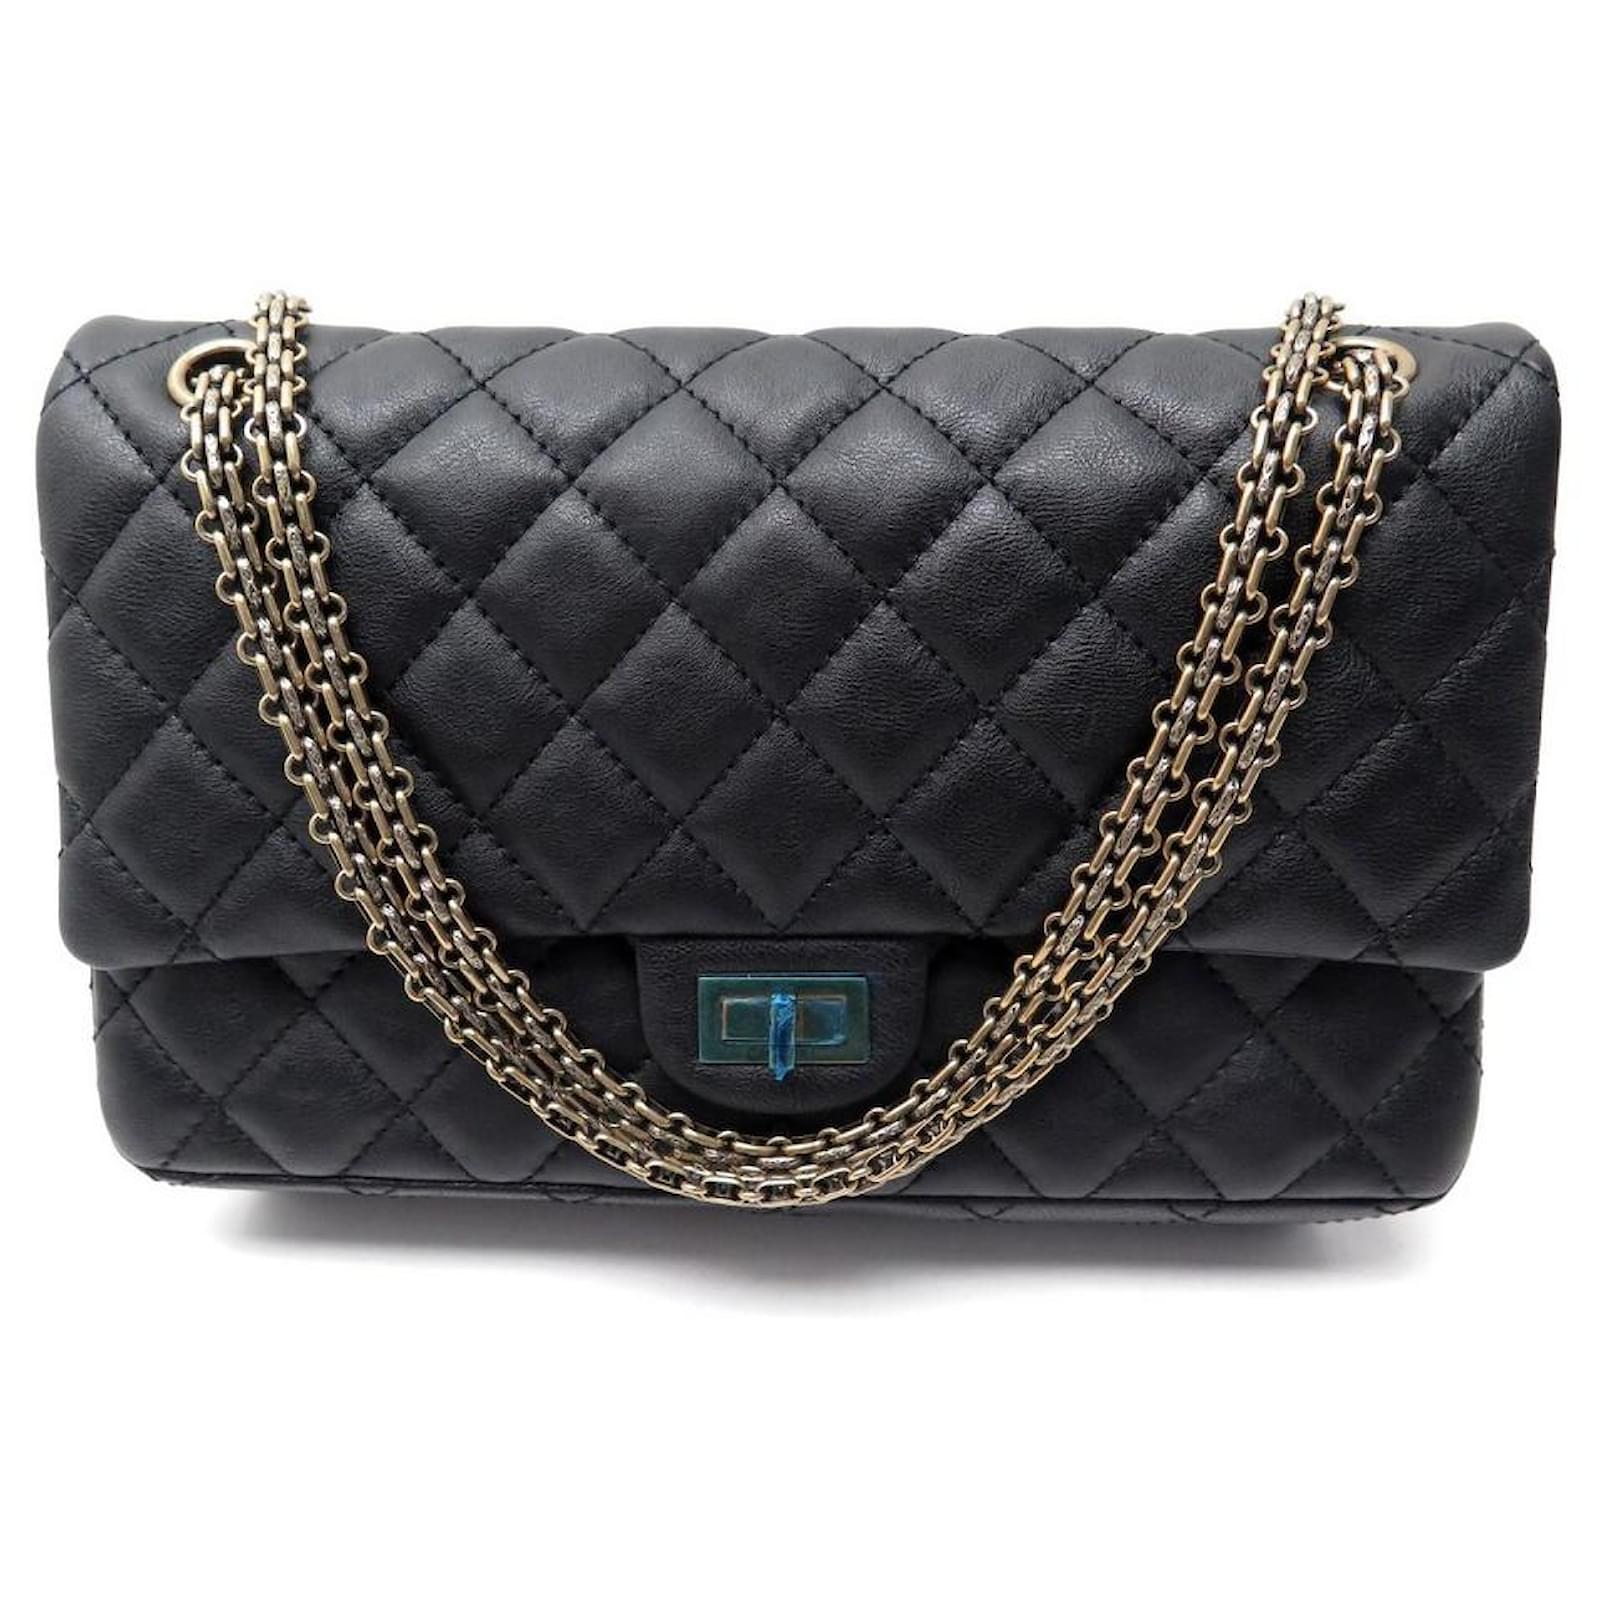 NEW LARGE CHANEL HANDBAG 2.55 BLACK QUILTED LEATHER LEATHER HAND